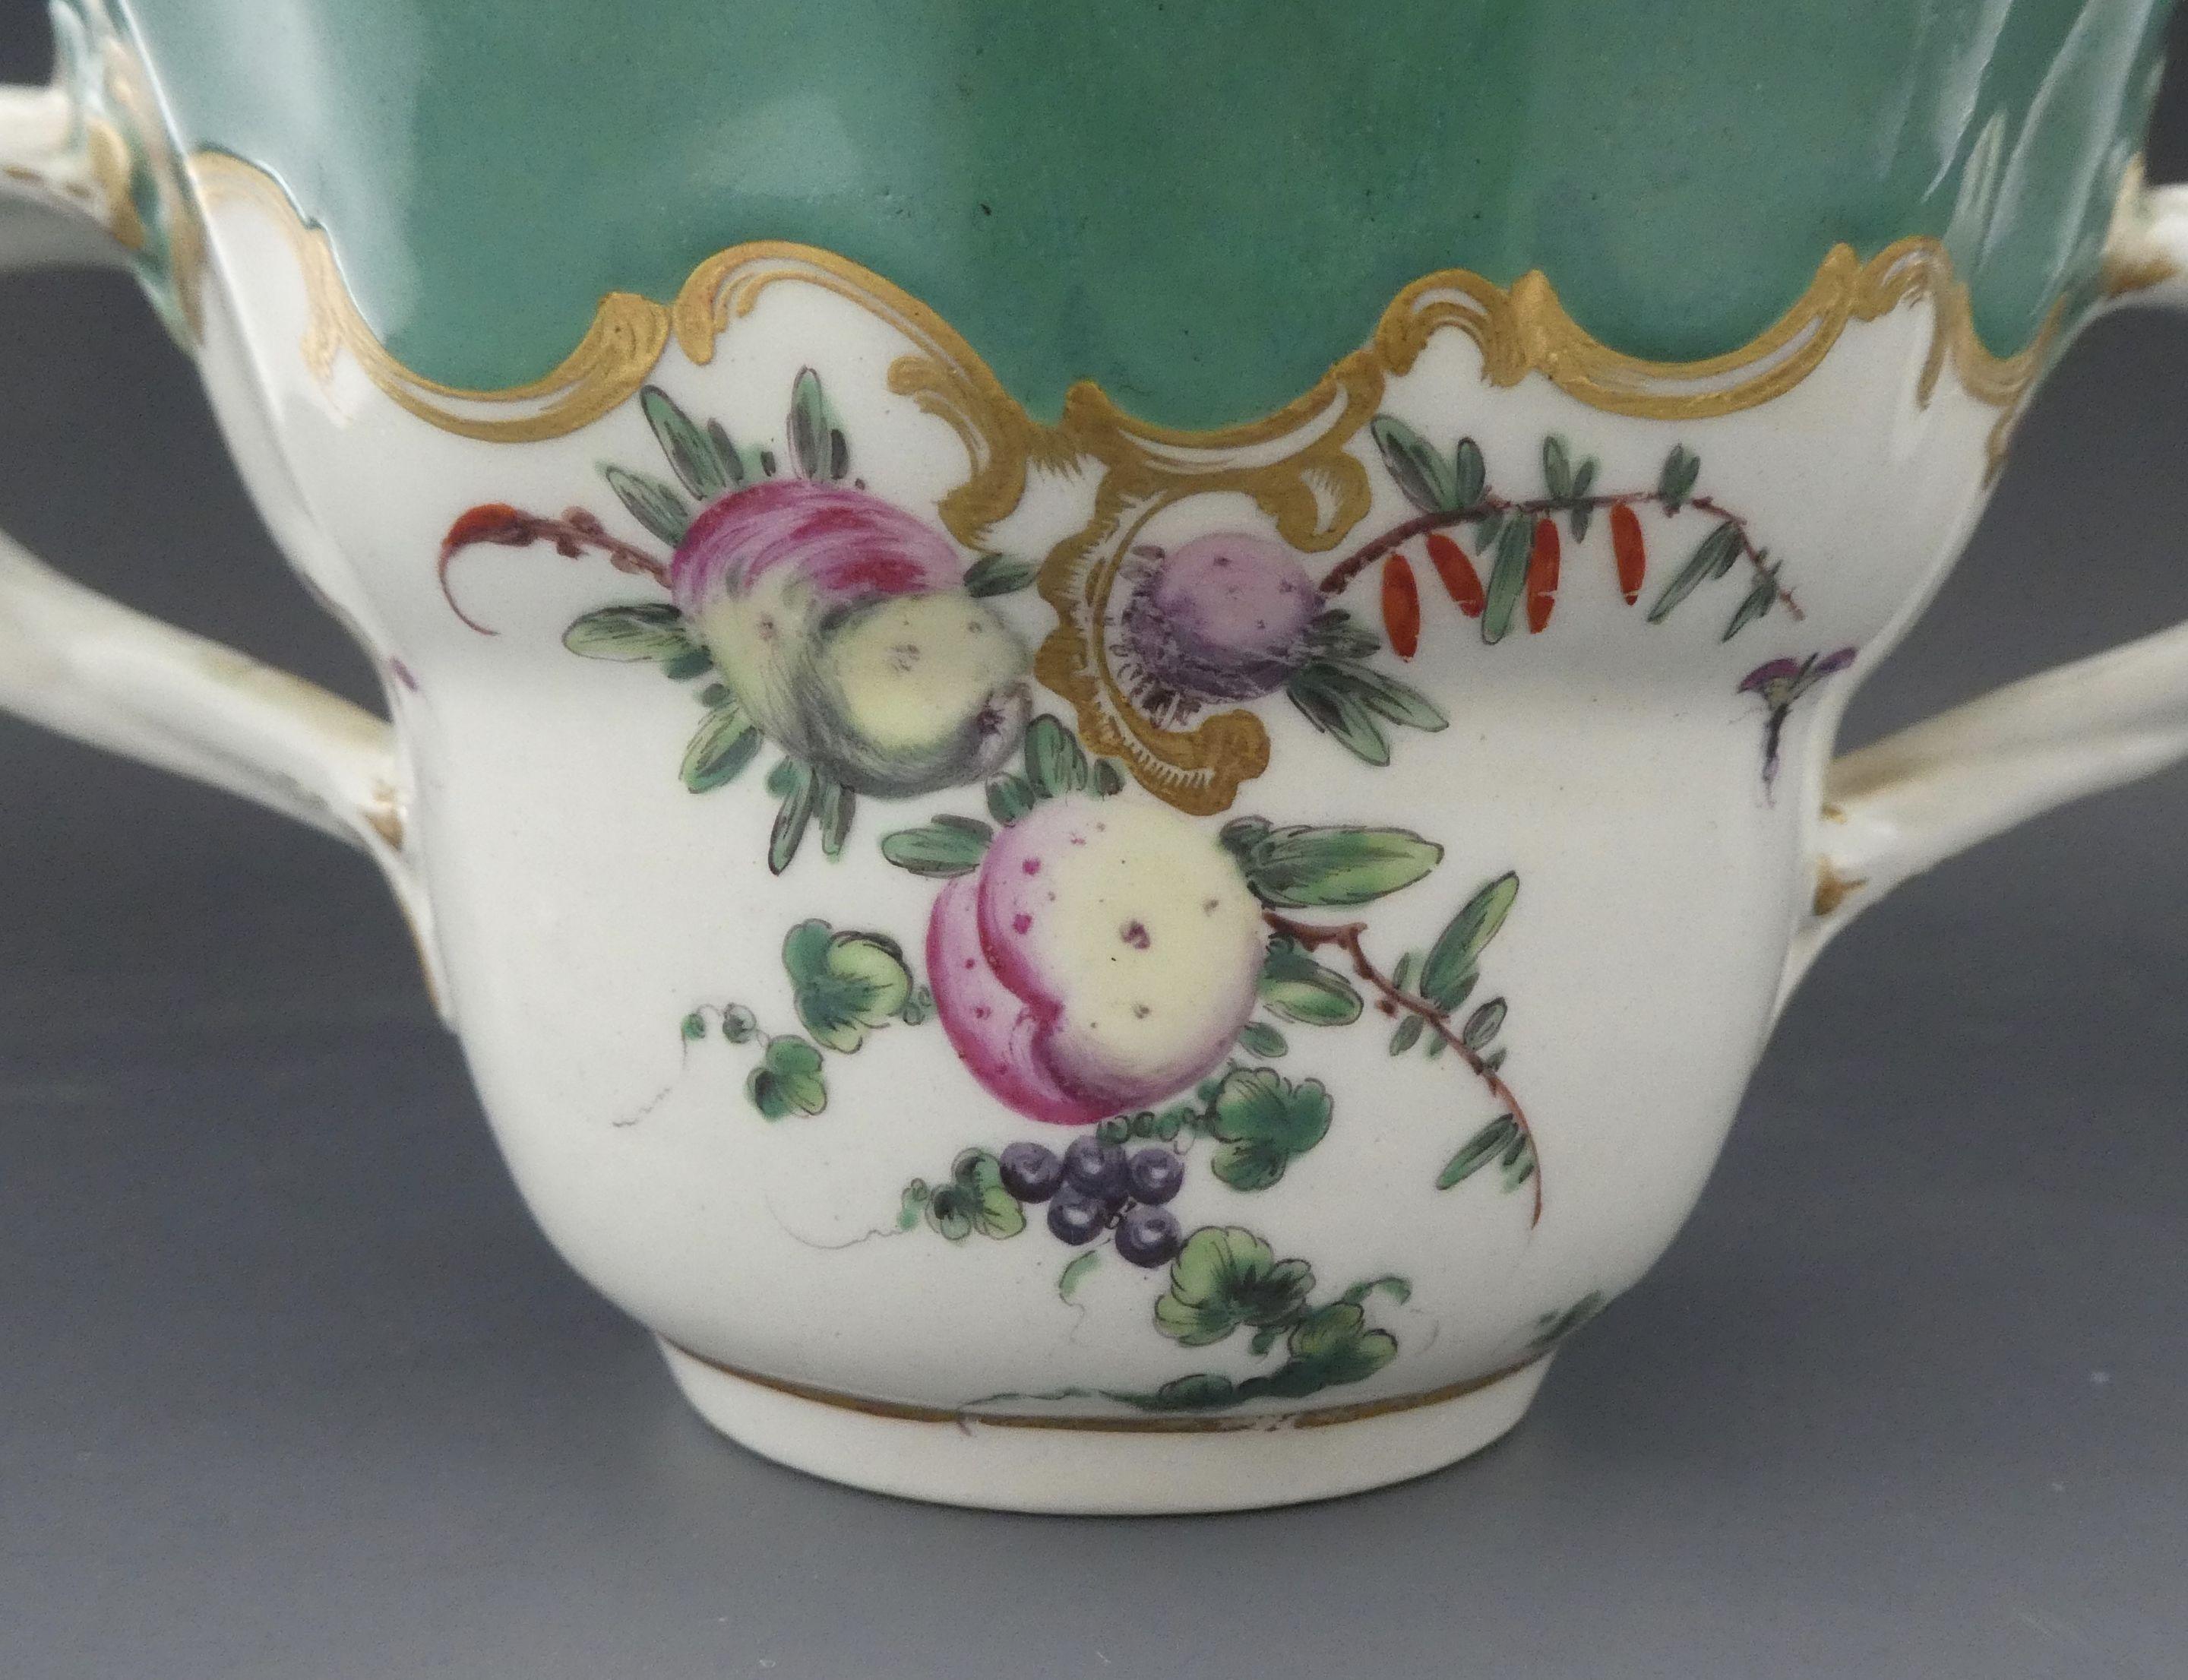 Late 18th Century Worcester Porcelain Chocolate Cup and Saucer, ‘Spotted Fruit’ Painter